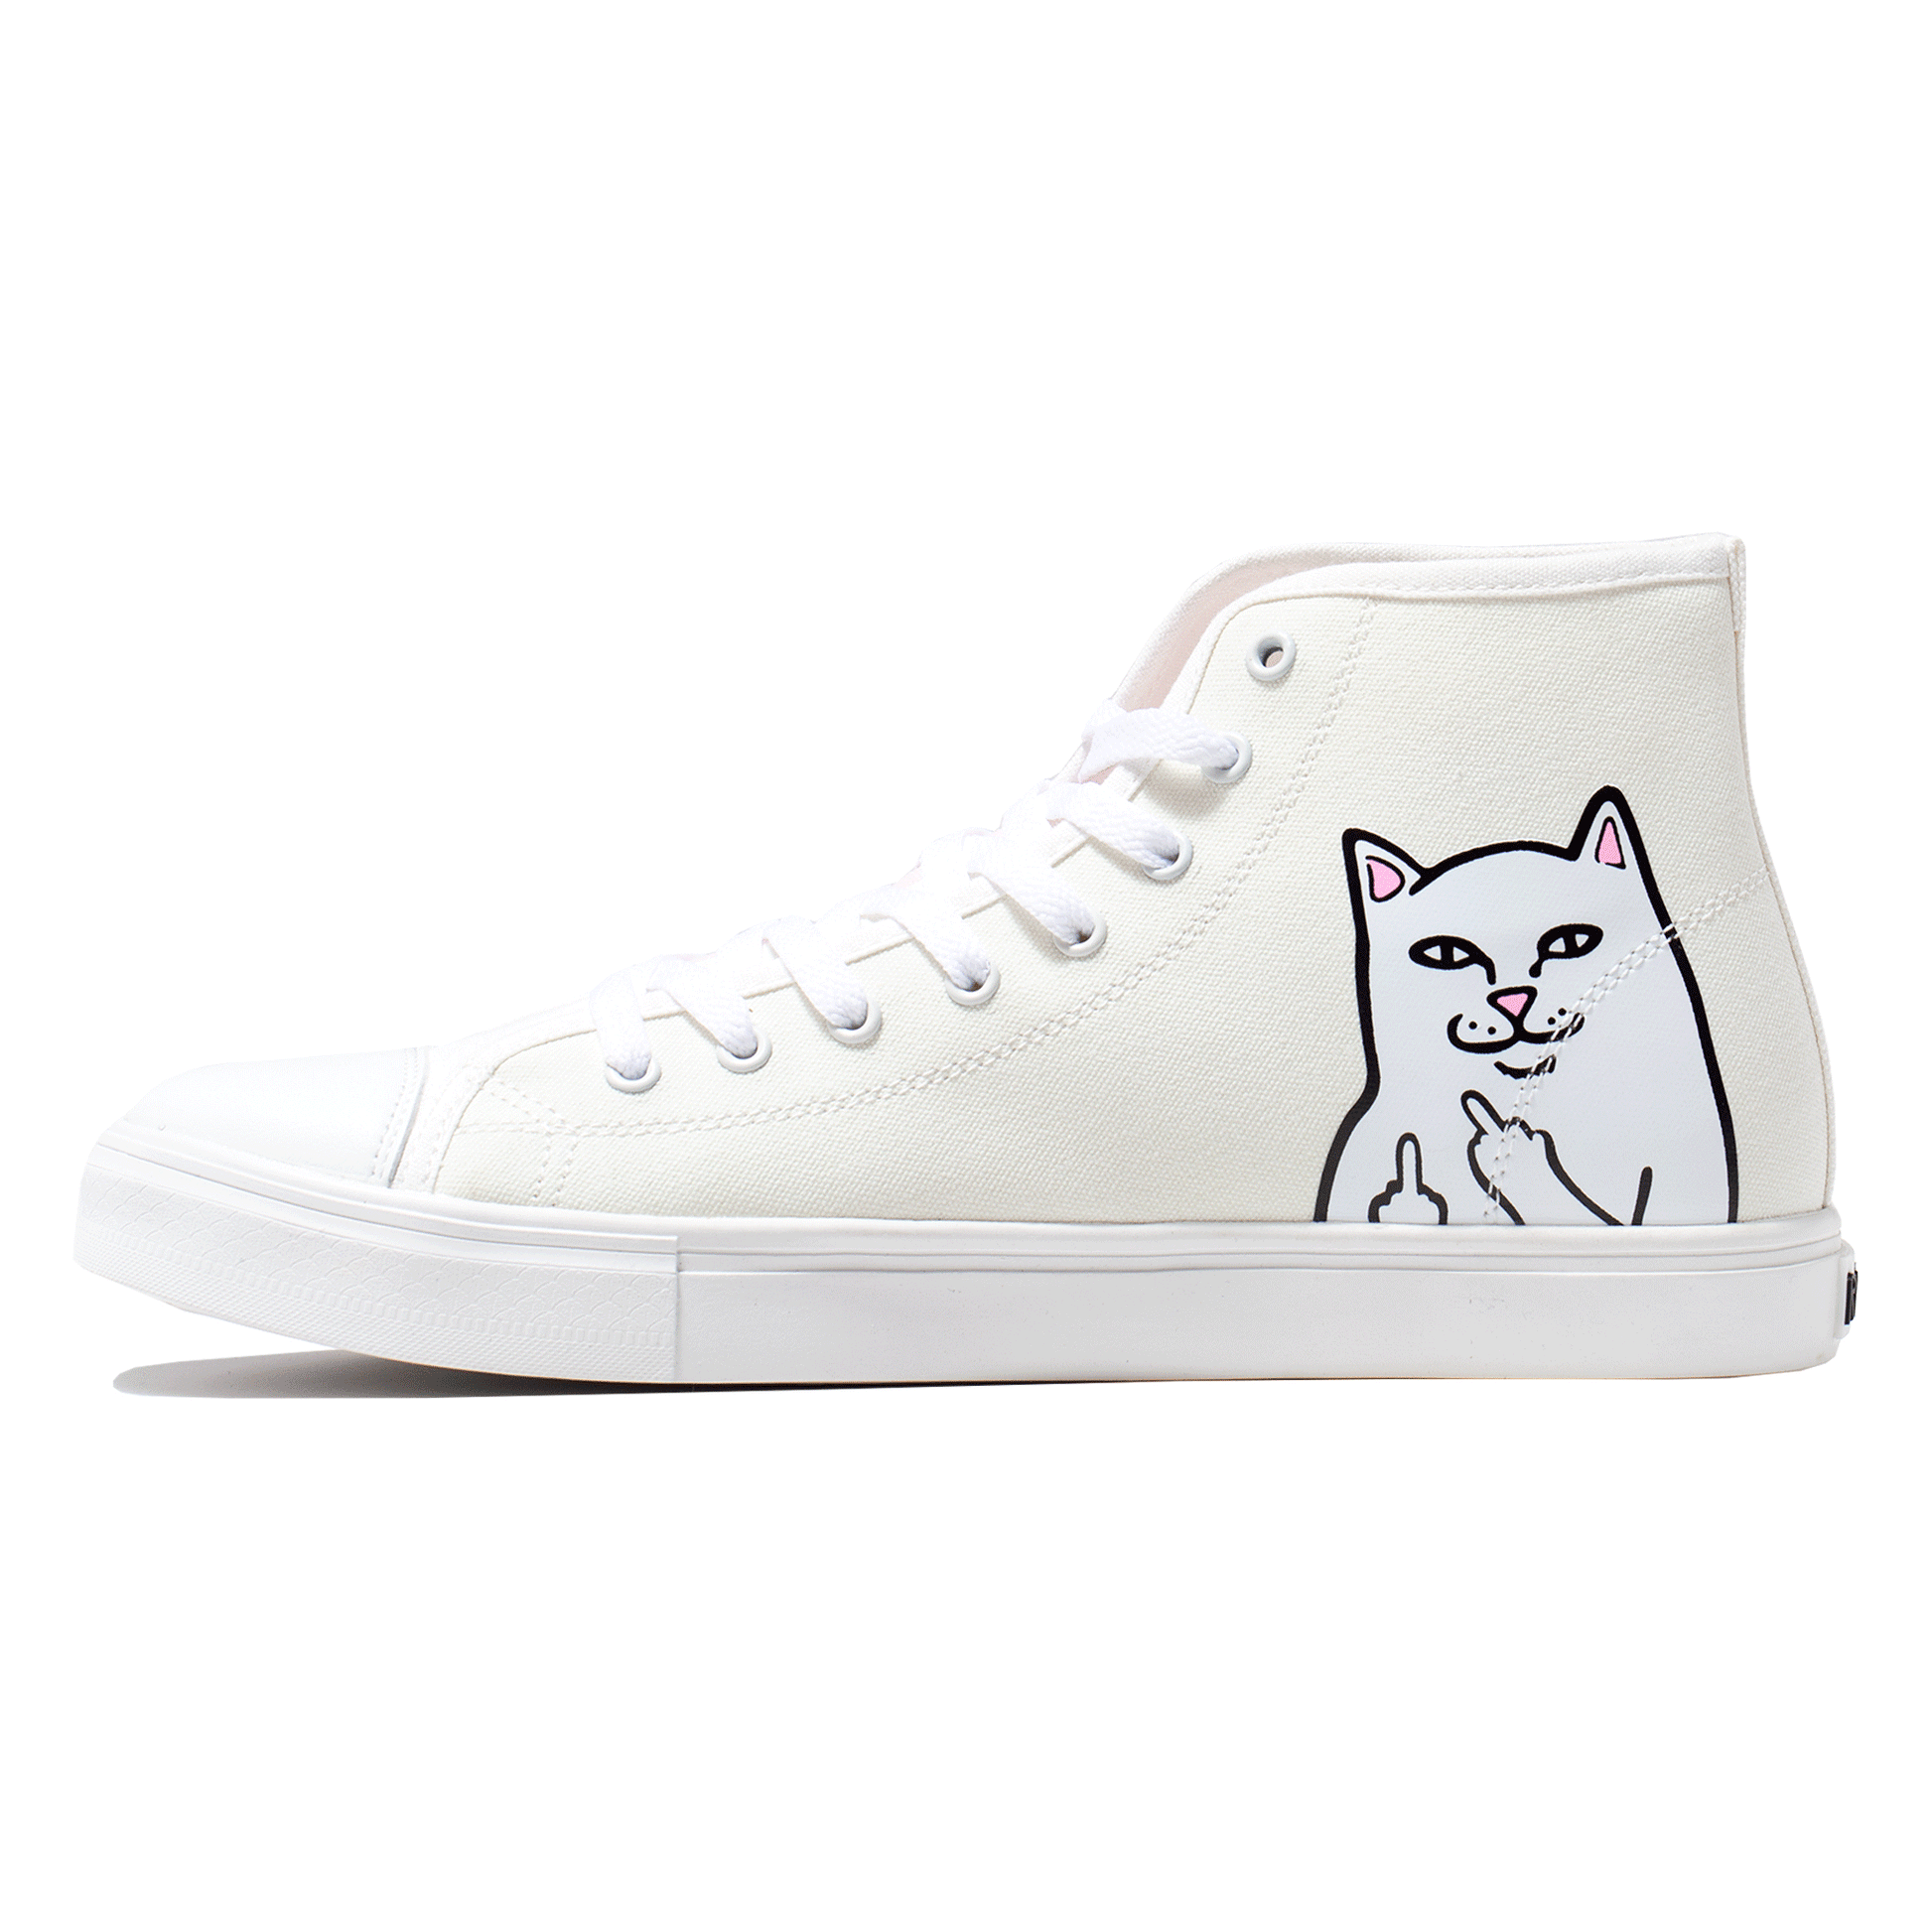 Ripndip Lord Nermal UV Activated High Top Shoes Blue/Fuschia